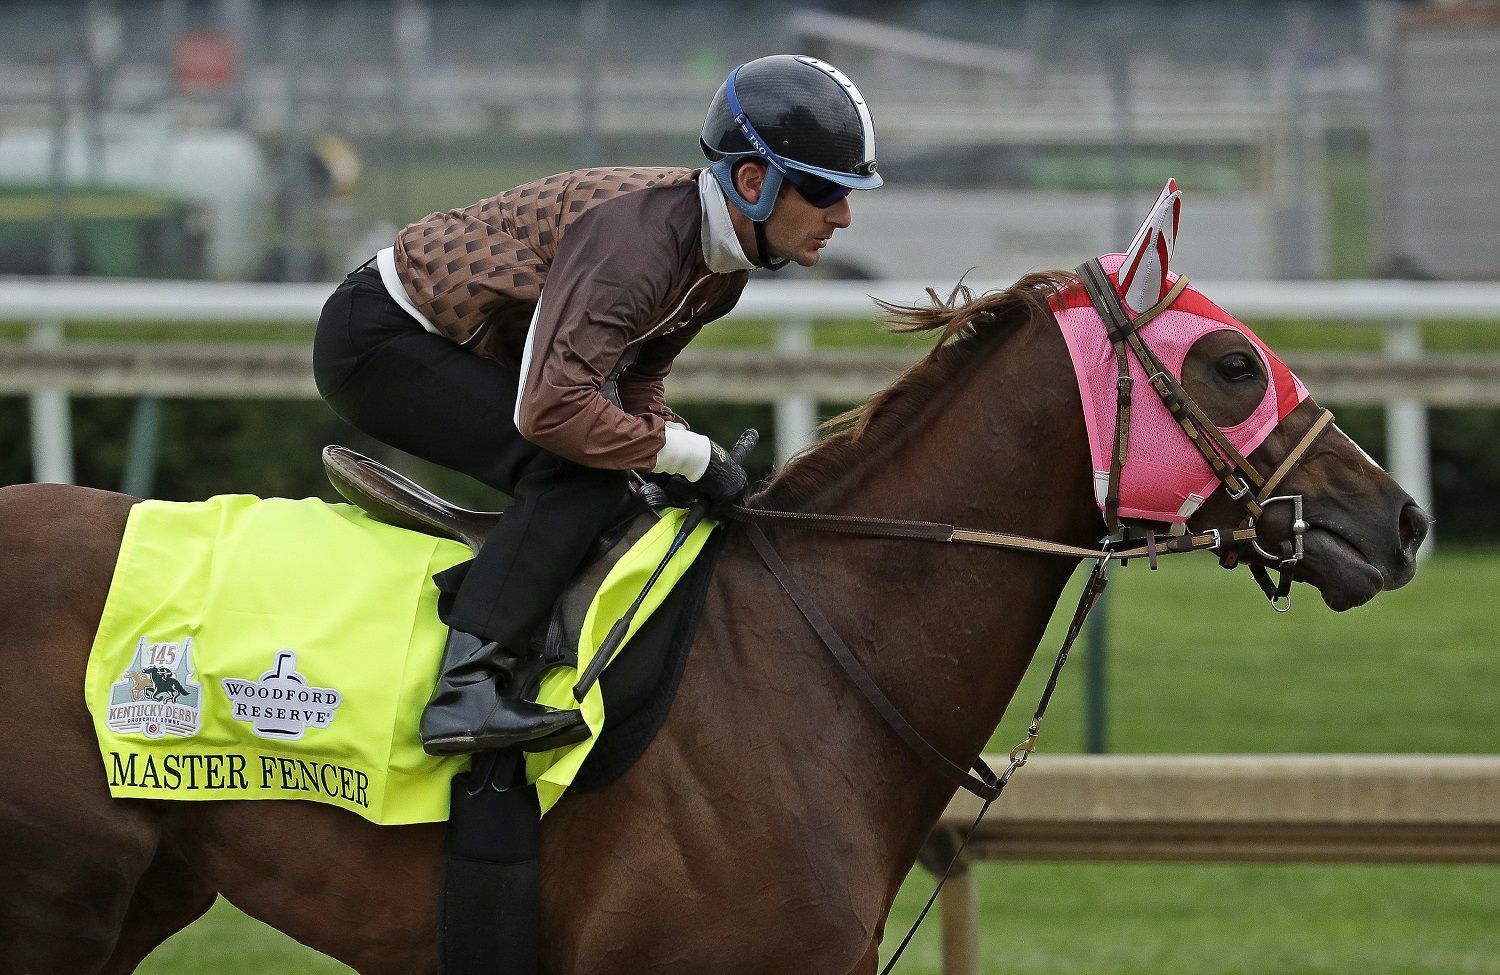 Kentucky Derby hopeful Master Fencer is ridden during a workout at Churchill Downs Tuesday, April 30, 2019, in Louisville, Ky. The 145th running of the Kentucky Derby is scheduled for Saturday, May 4. (AP Photo/Charlie Riedel)